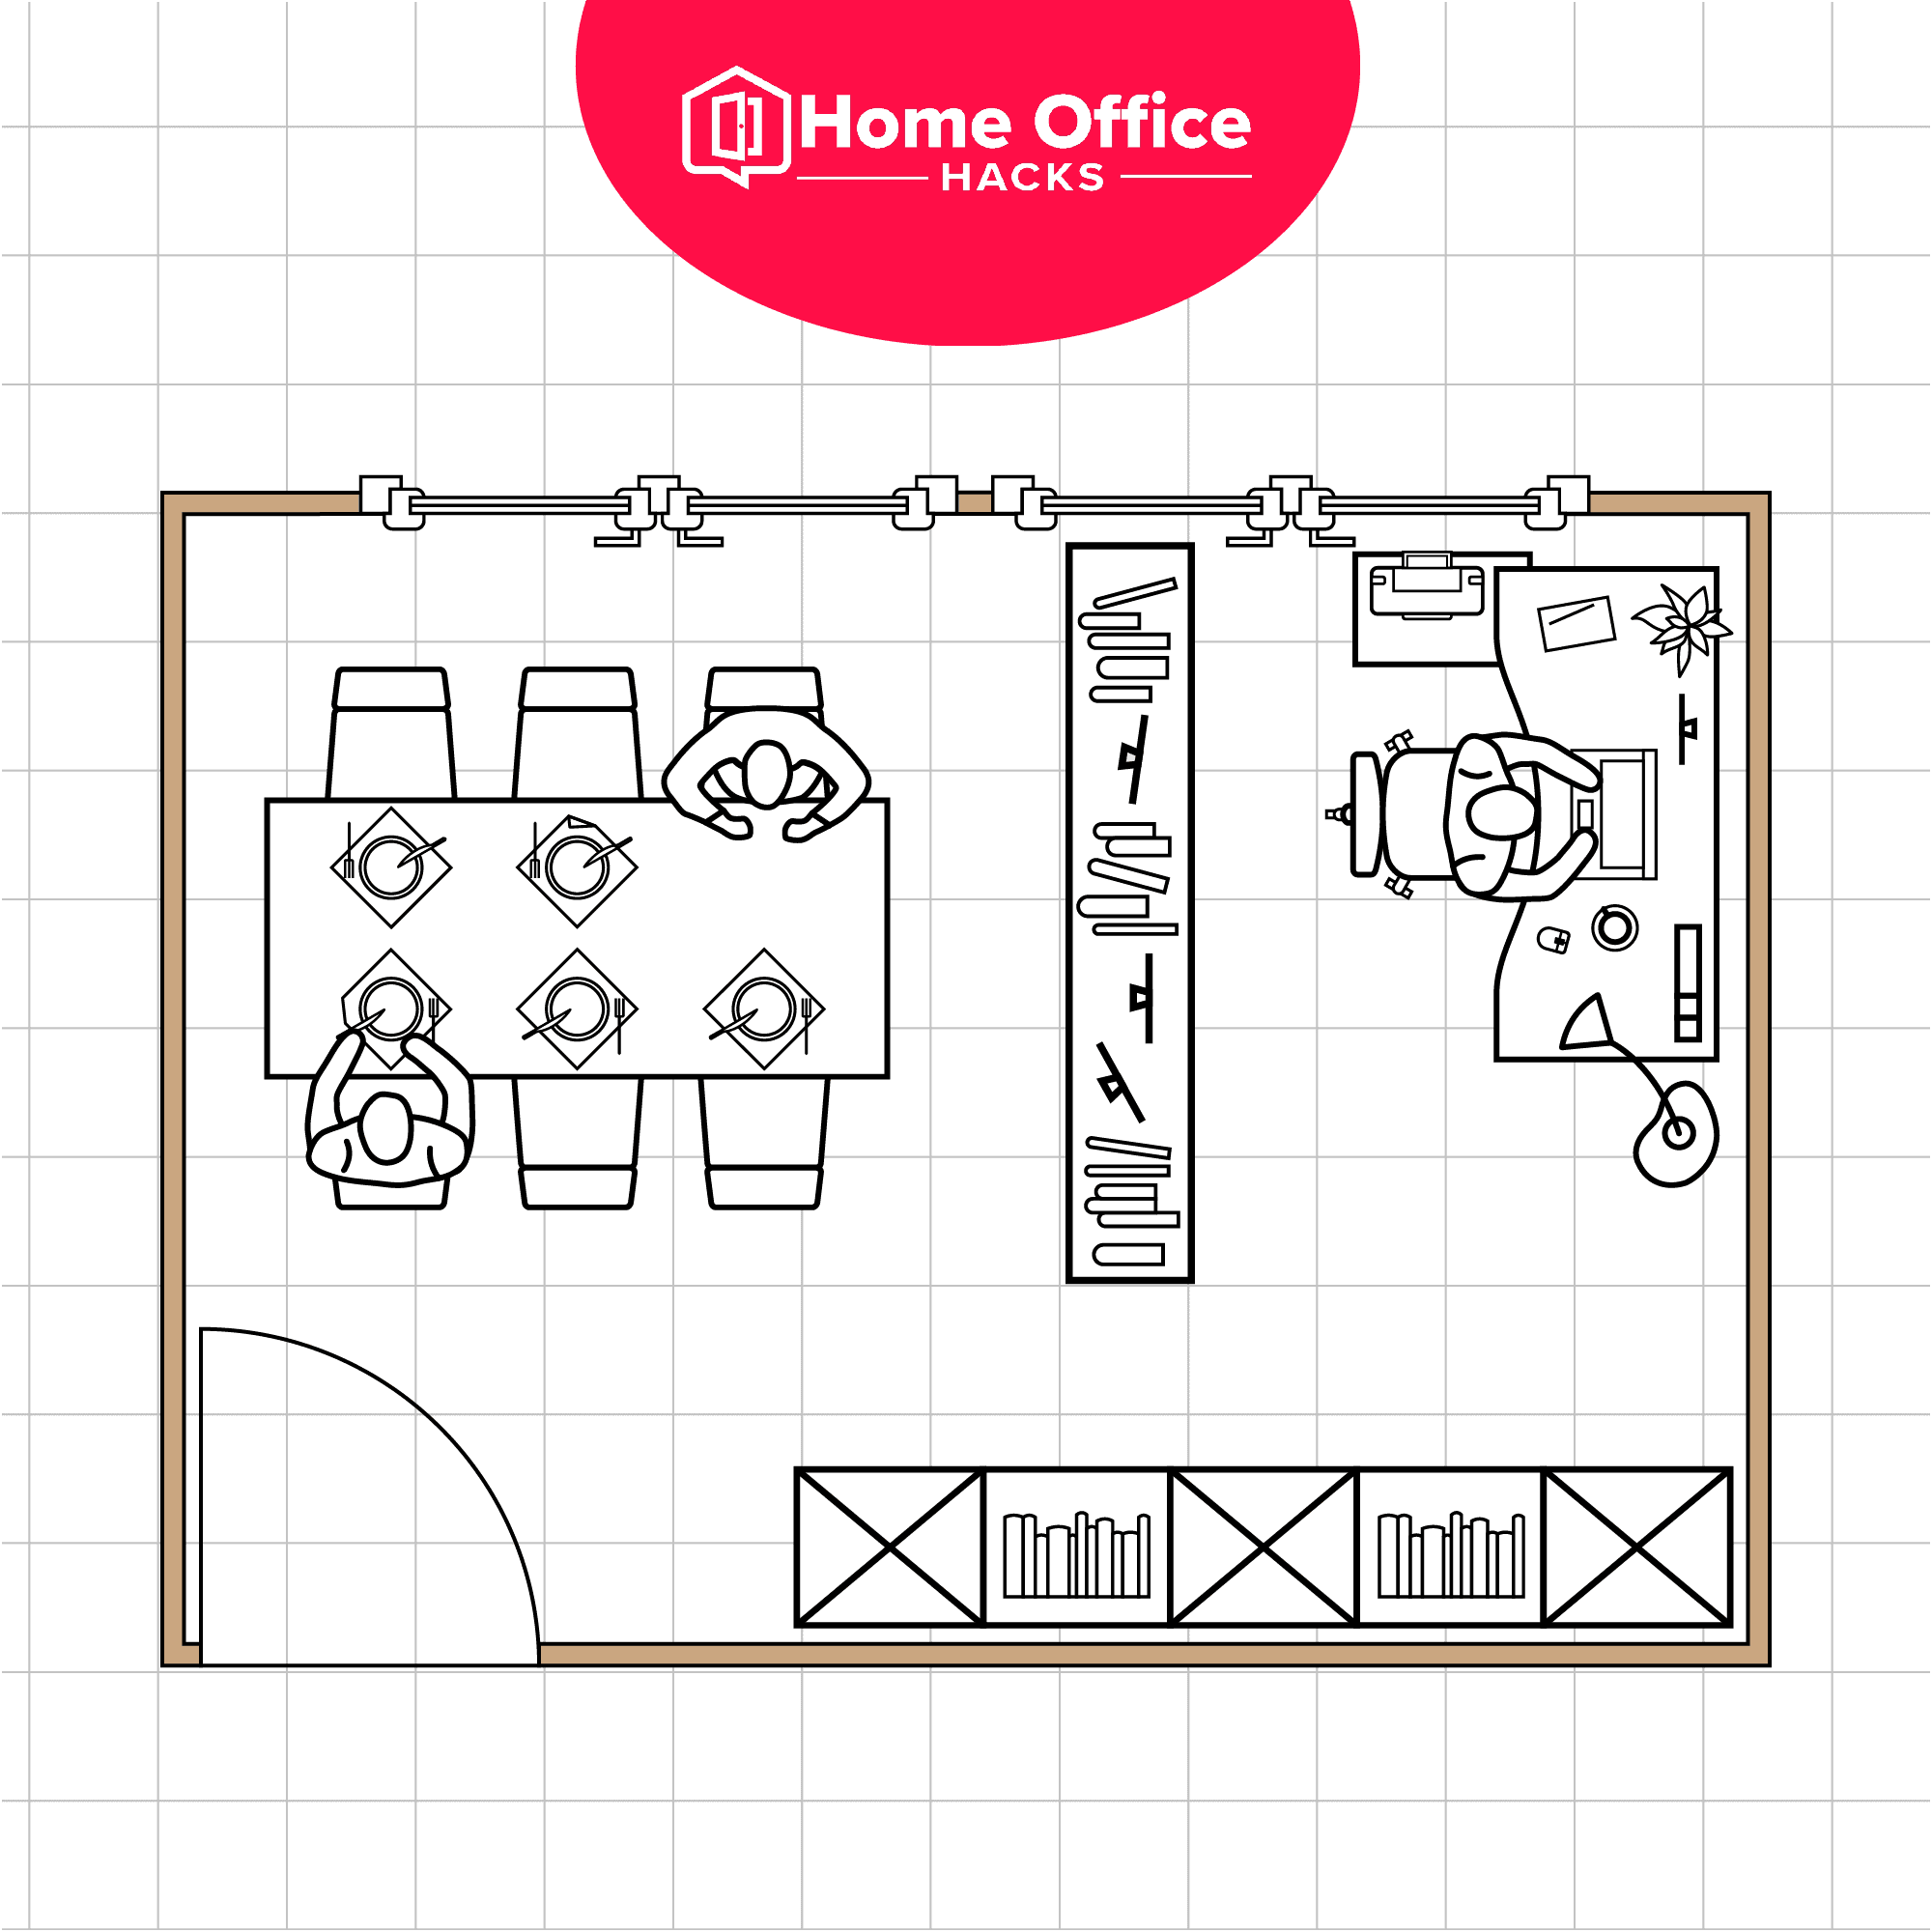 Here is an example of what a potential home office located in a dining room could look like